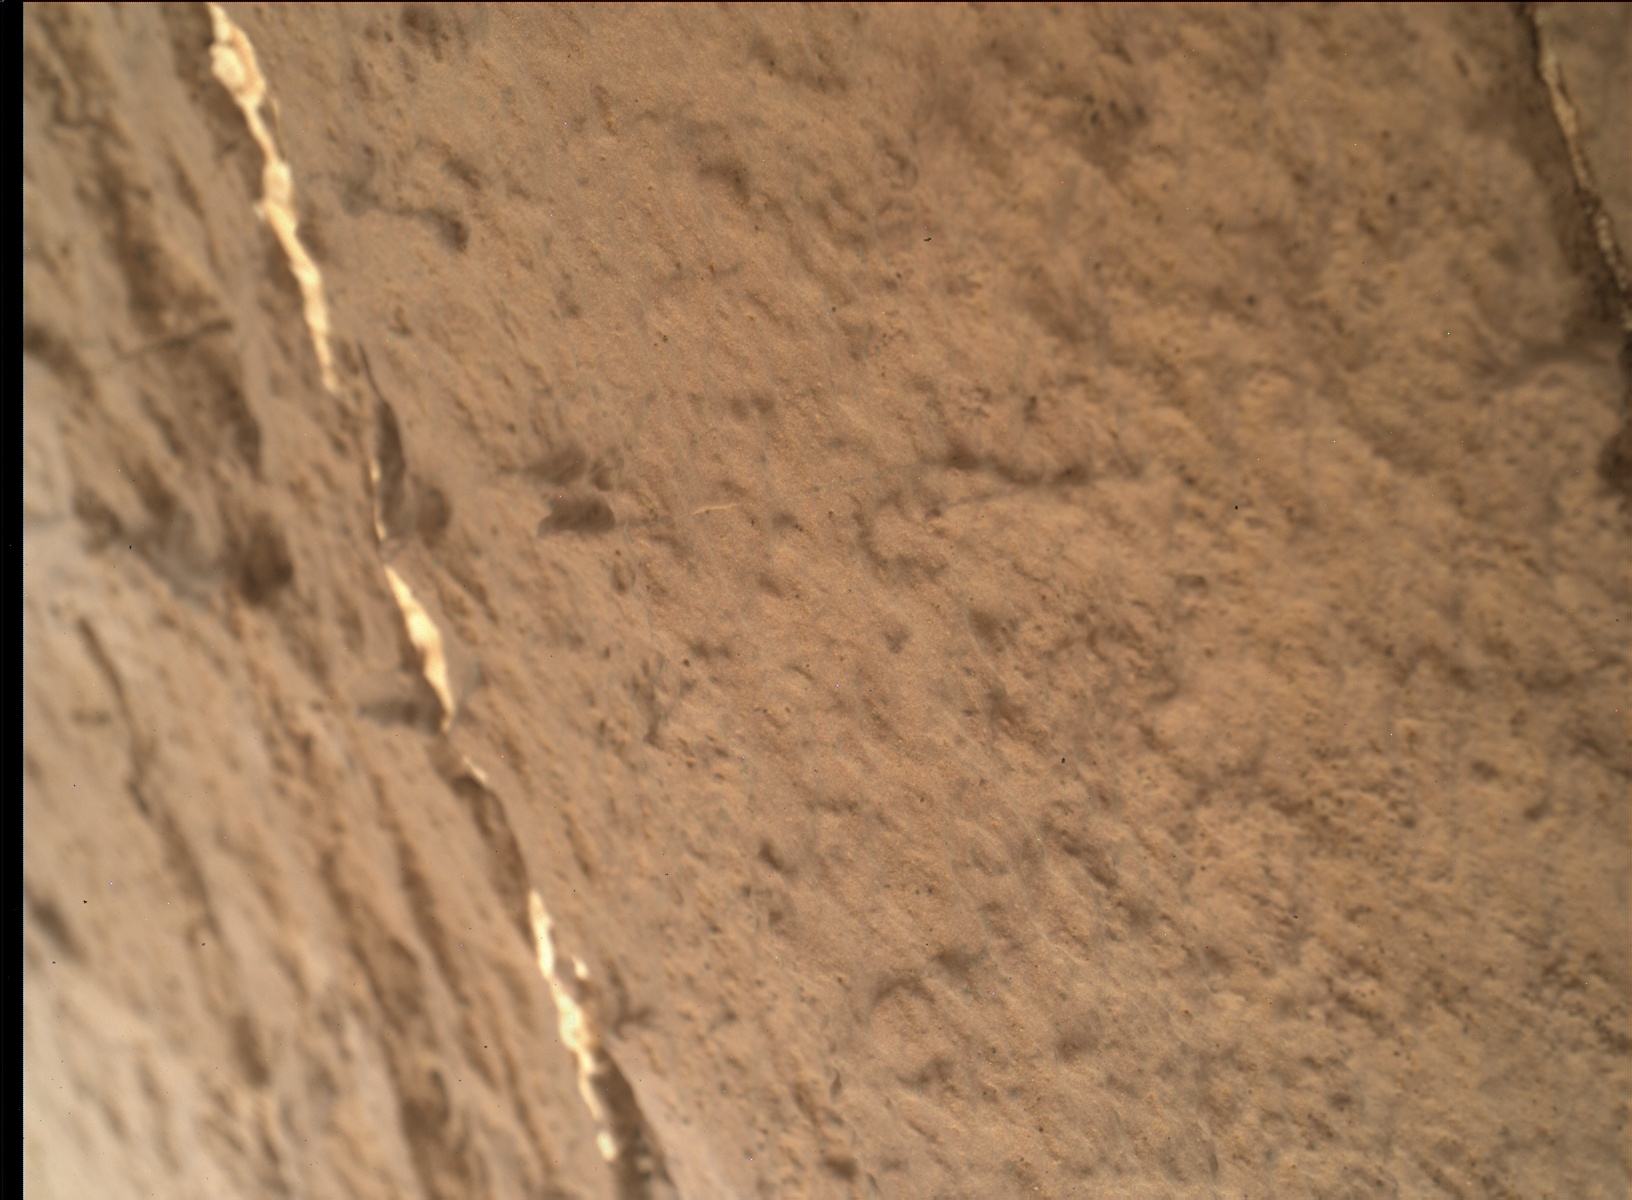 Nasa's Mars rover Curiosity acquired this image using its Mars Hand Lens Imager (MAHLI) on Sol 1504